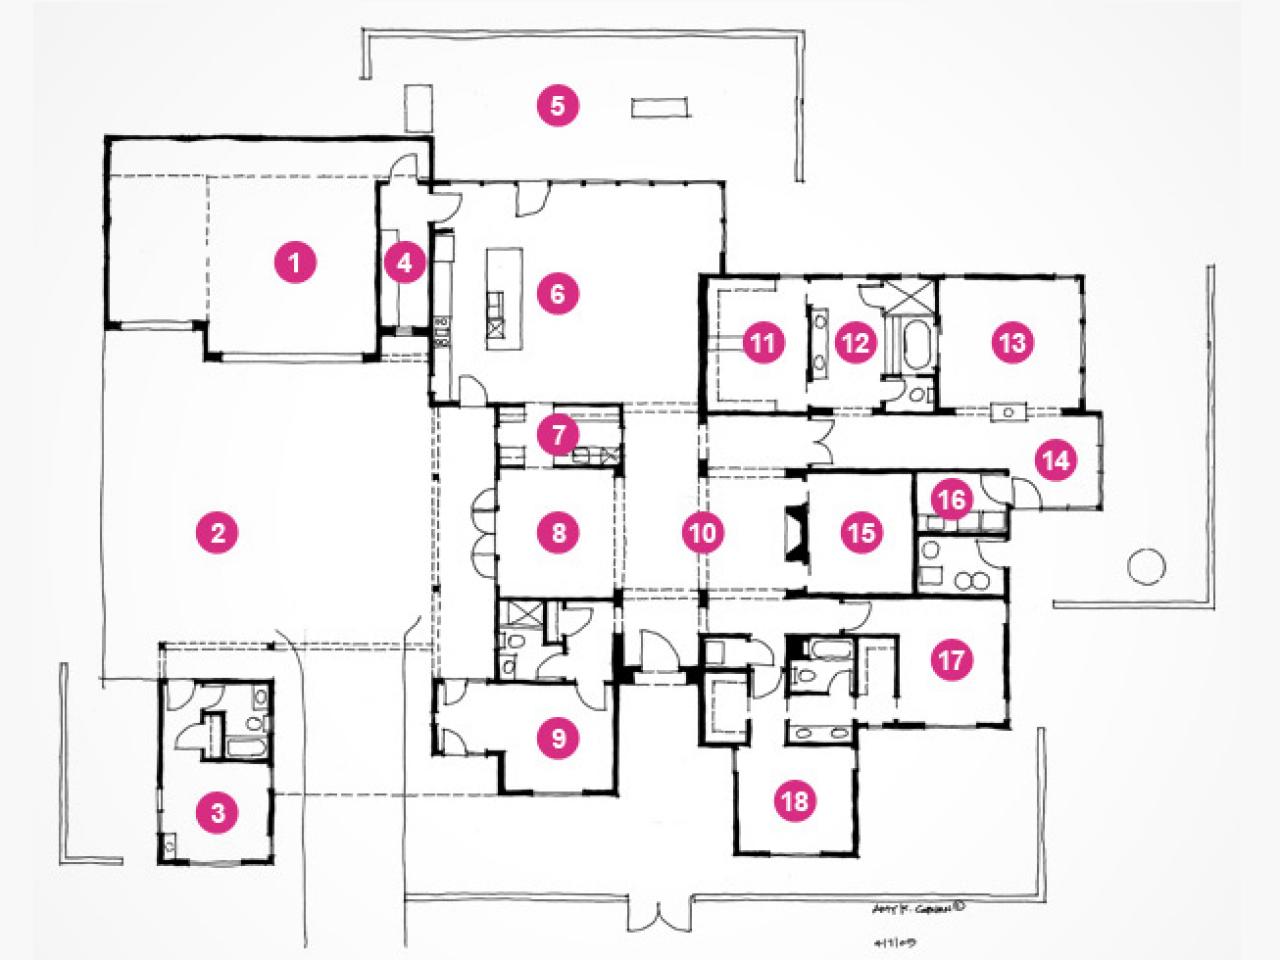 HGTV Dream Home 2010 Floor Plan and Rendering Pictures